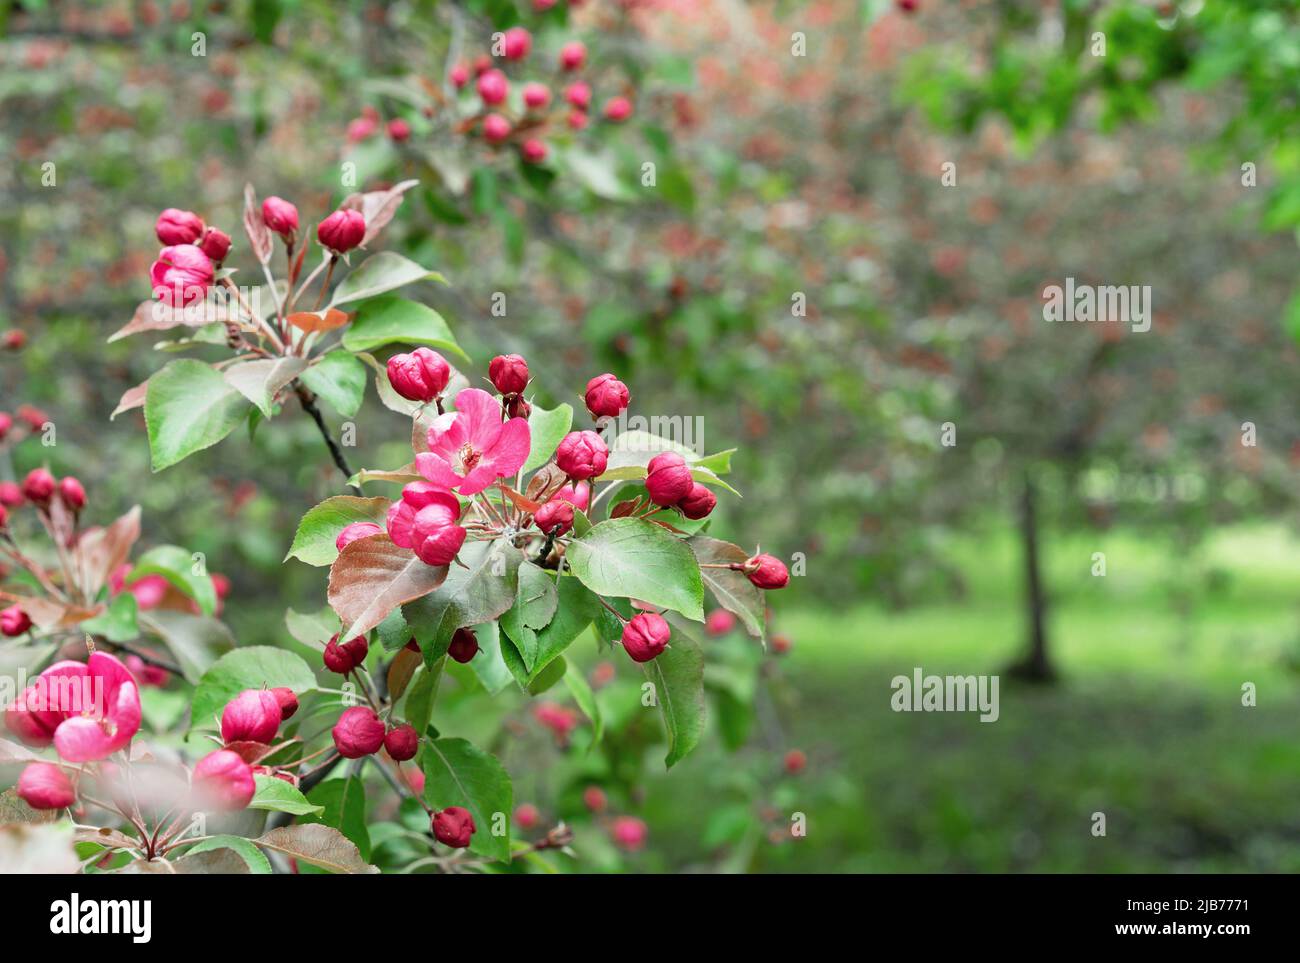 Apple tree with pink flowers in a spring garden. Pink-red inflorescences of an ornamental apple tree. Stock Photo